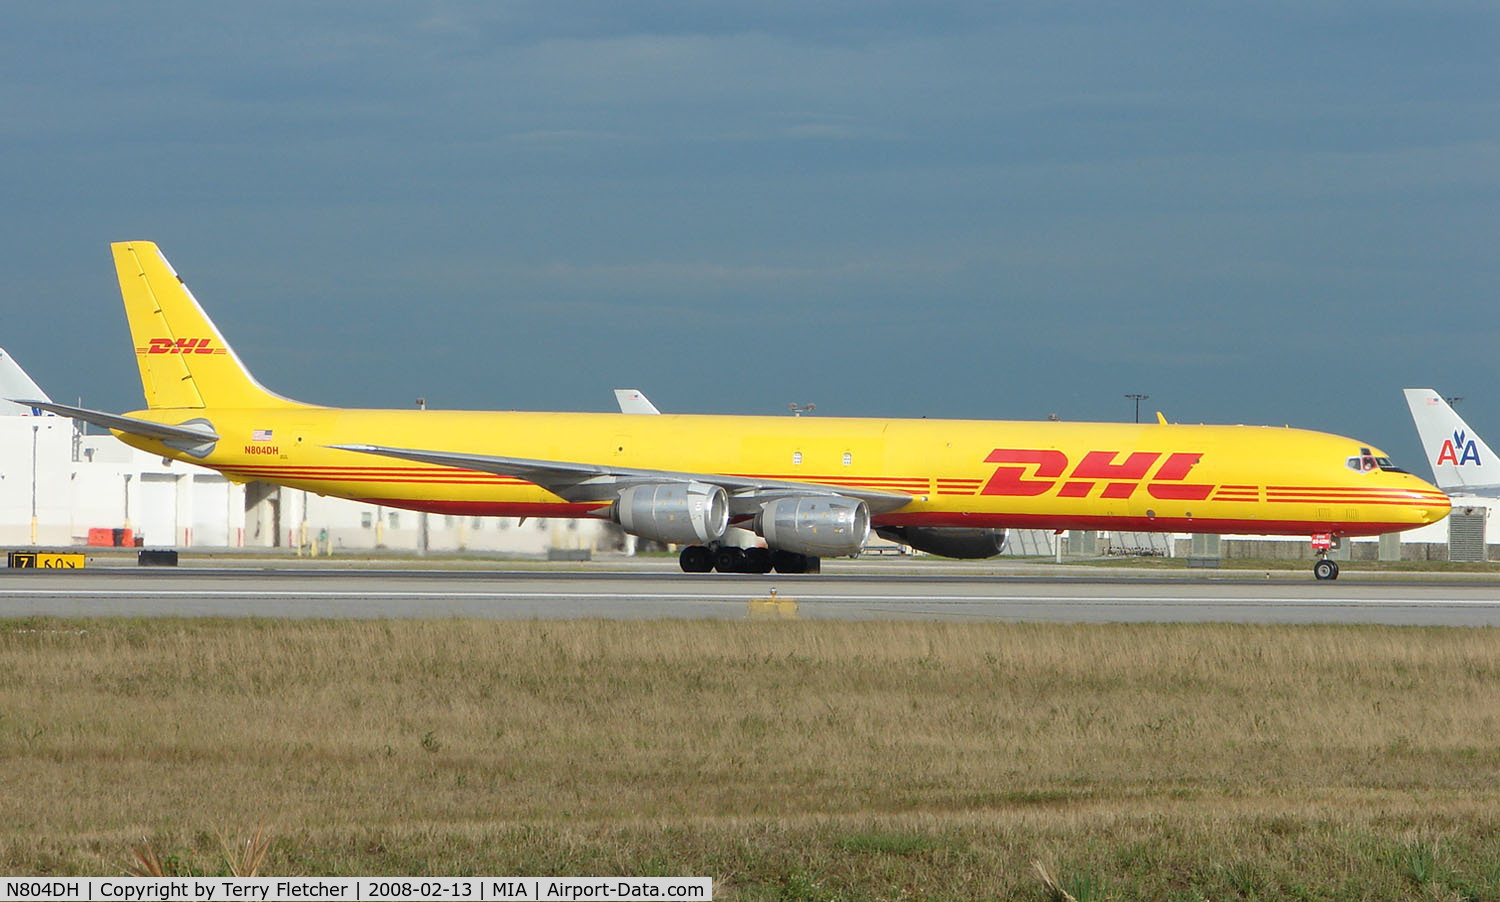 N804DH, 1969 Douglas DC-8-73F C/N 46124, The yellow DHL livery makes this DC-8 appear incredibly long